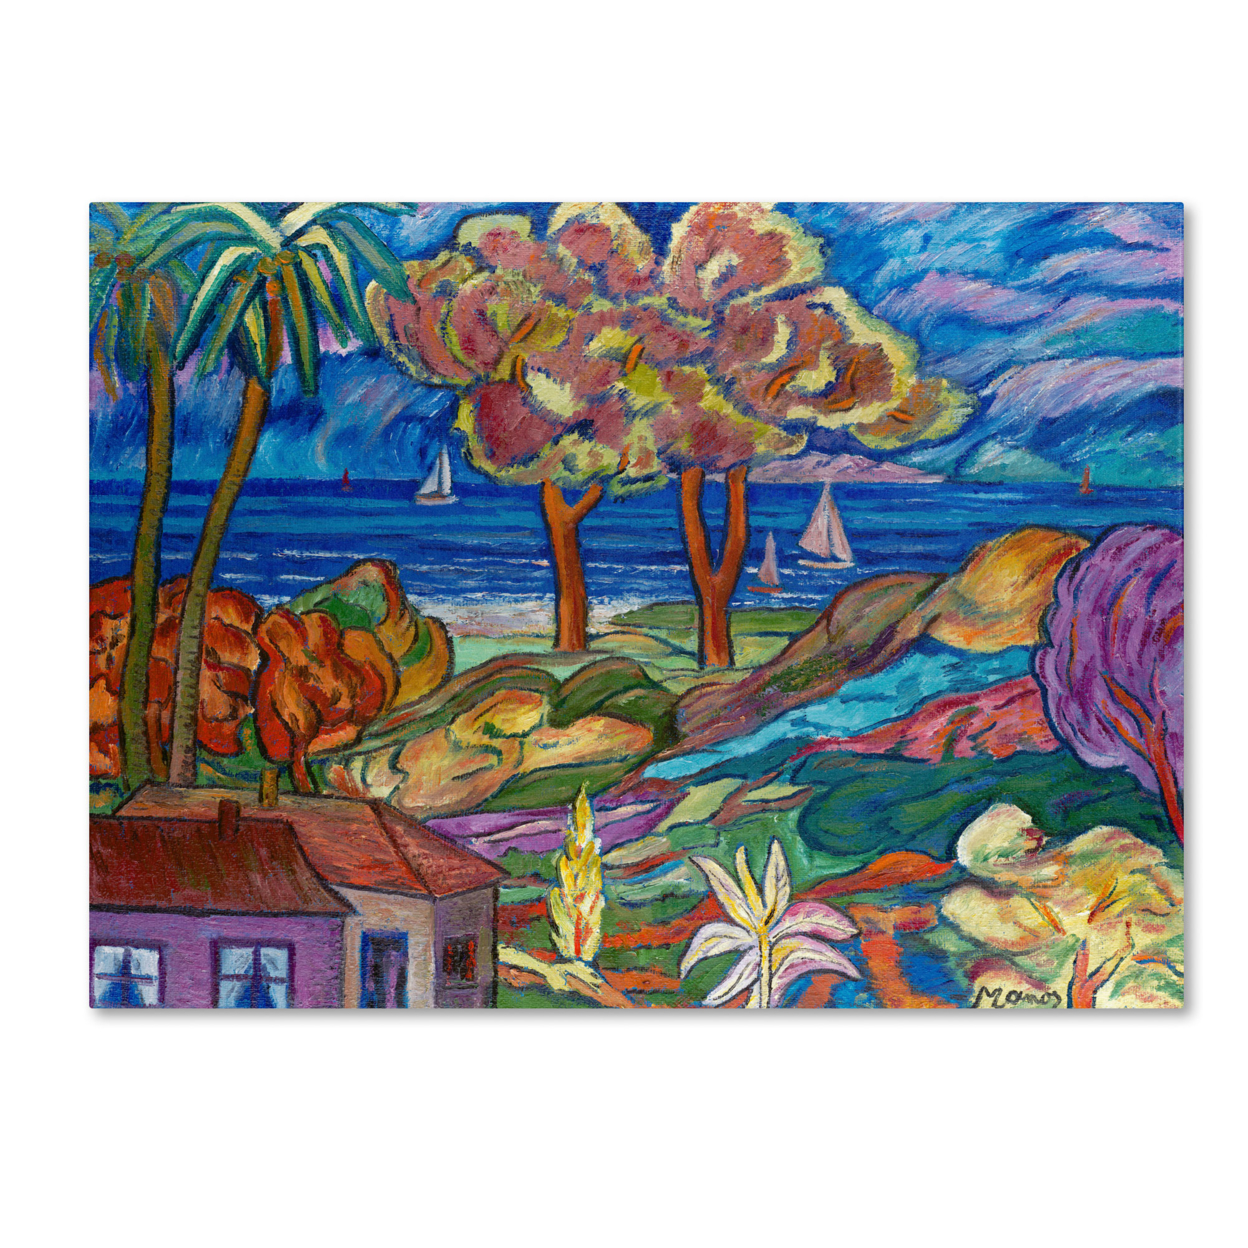 Manor Shadian 'House By The Beach' Canvas Wall Art 35 X 47 Inches